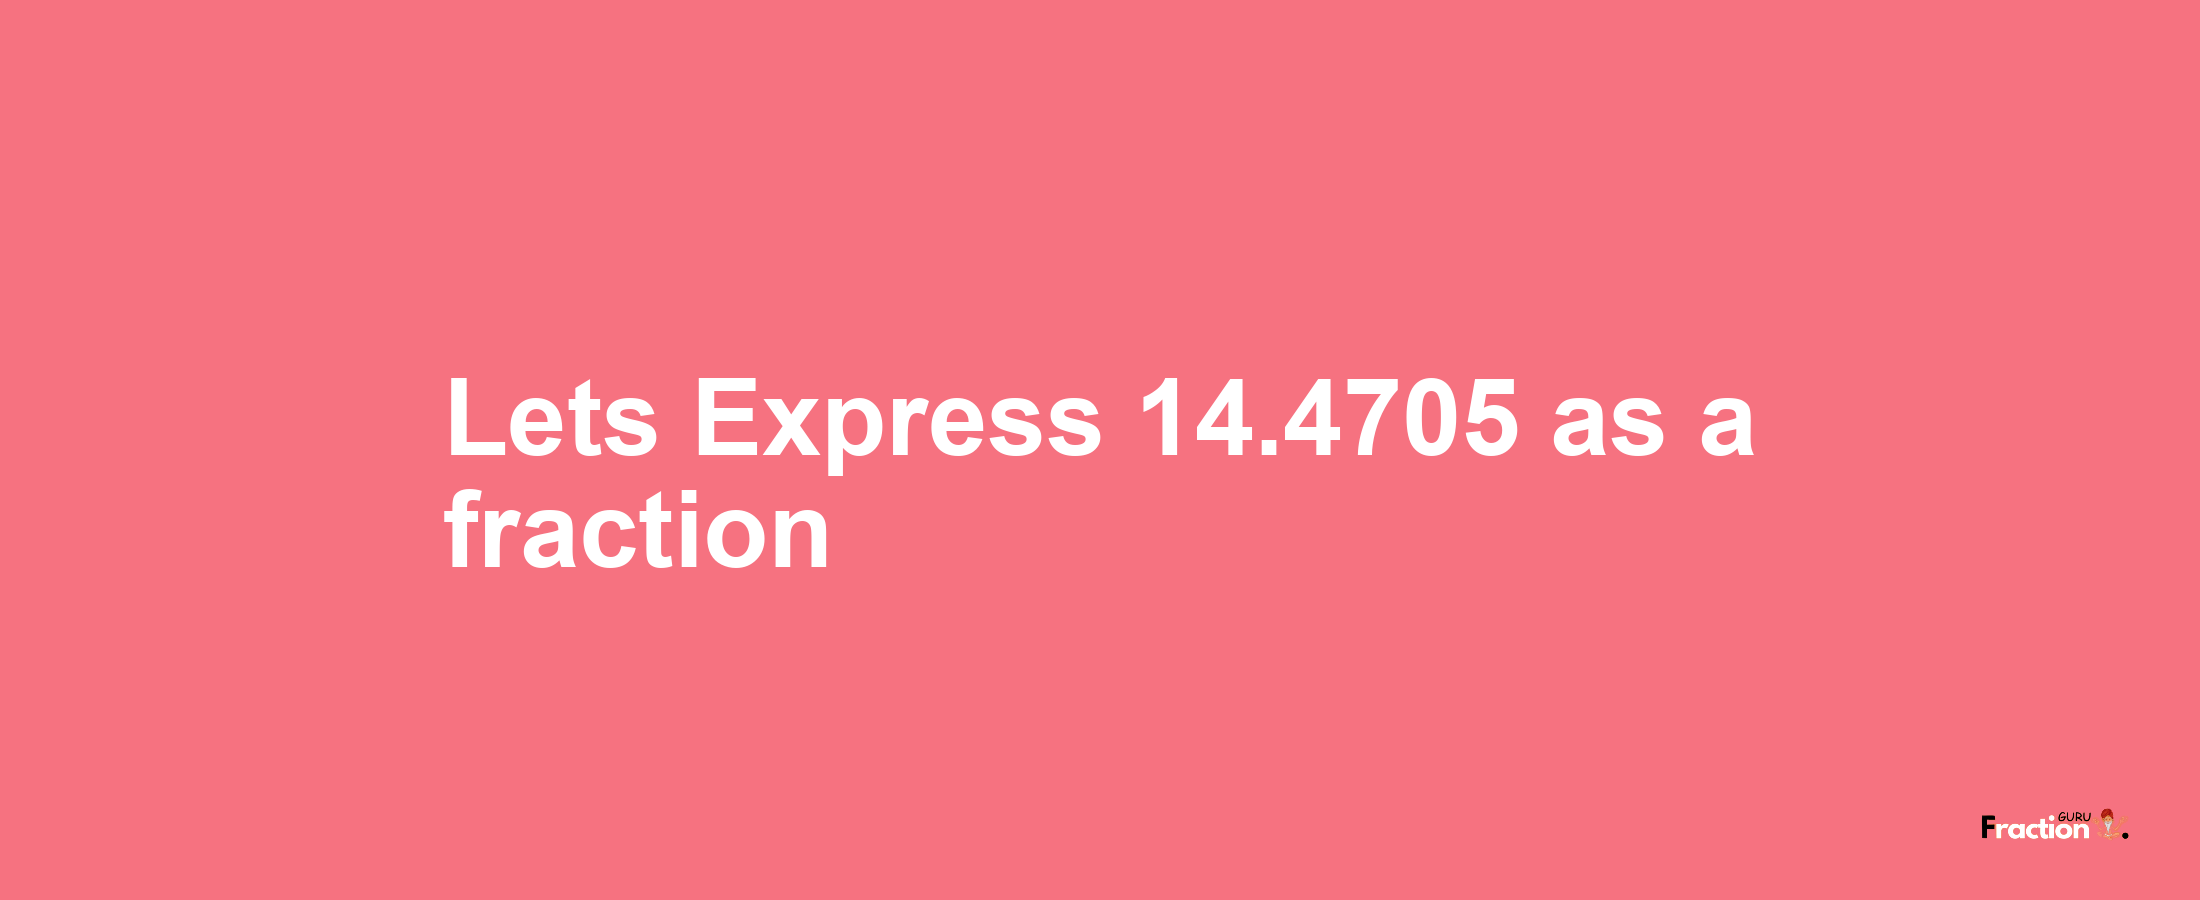 Lets Express 14.4705 as afraction